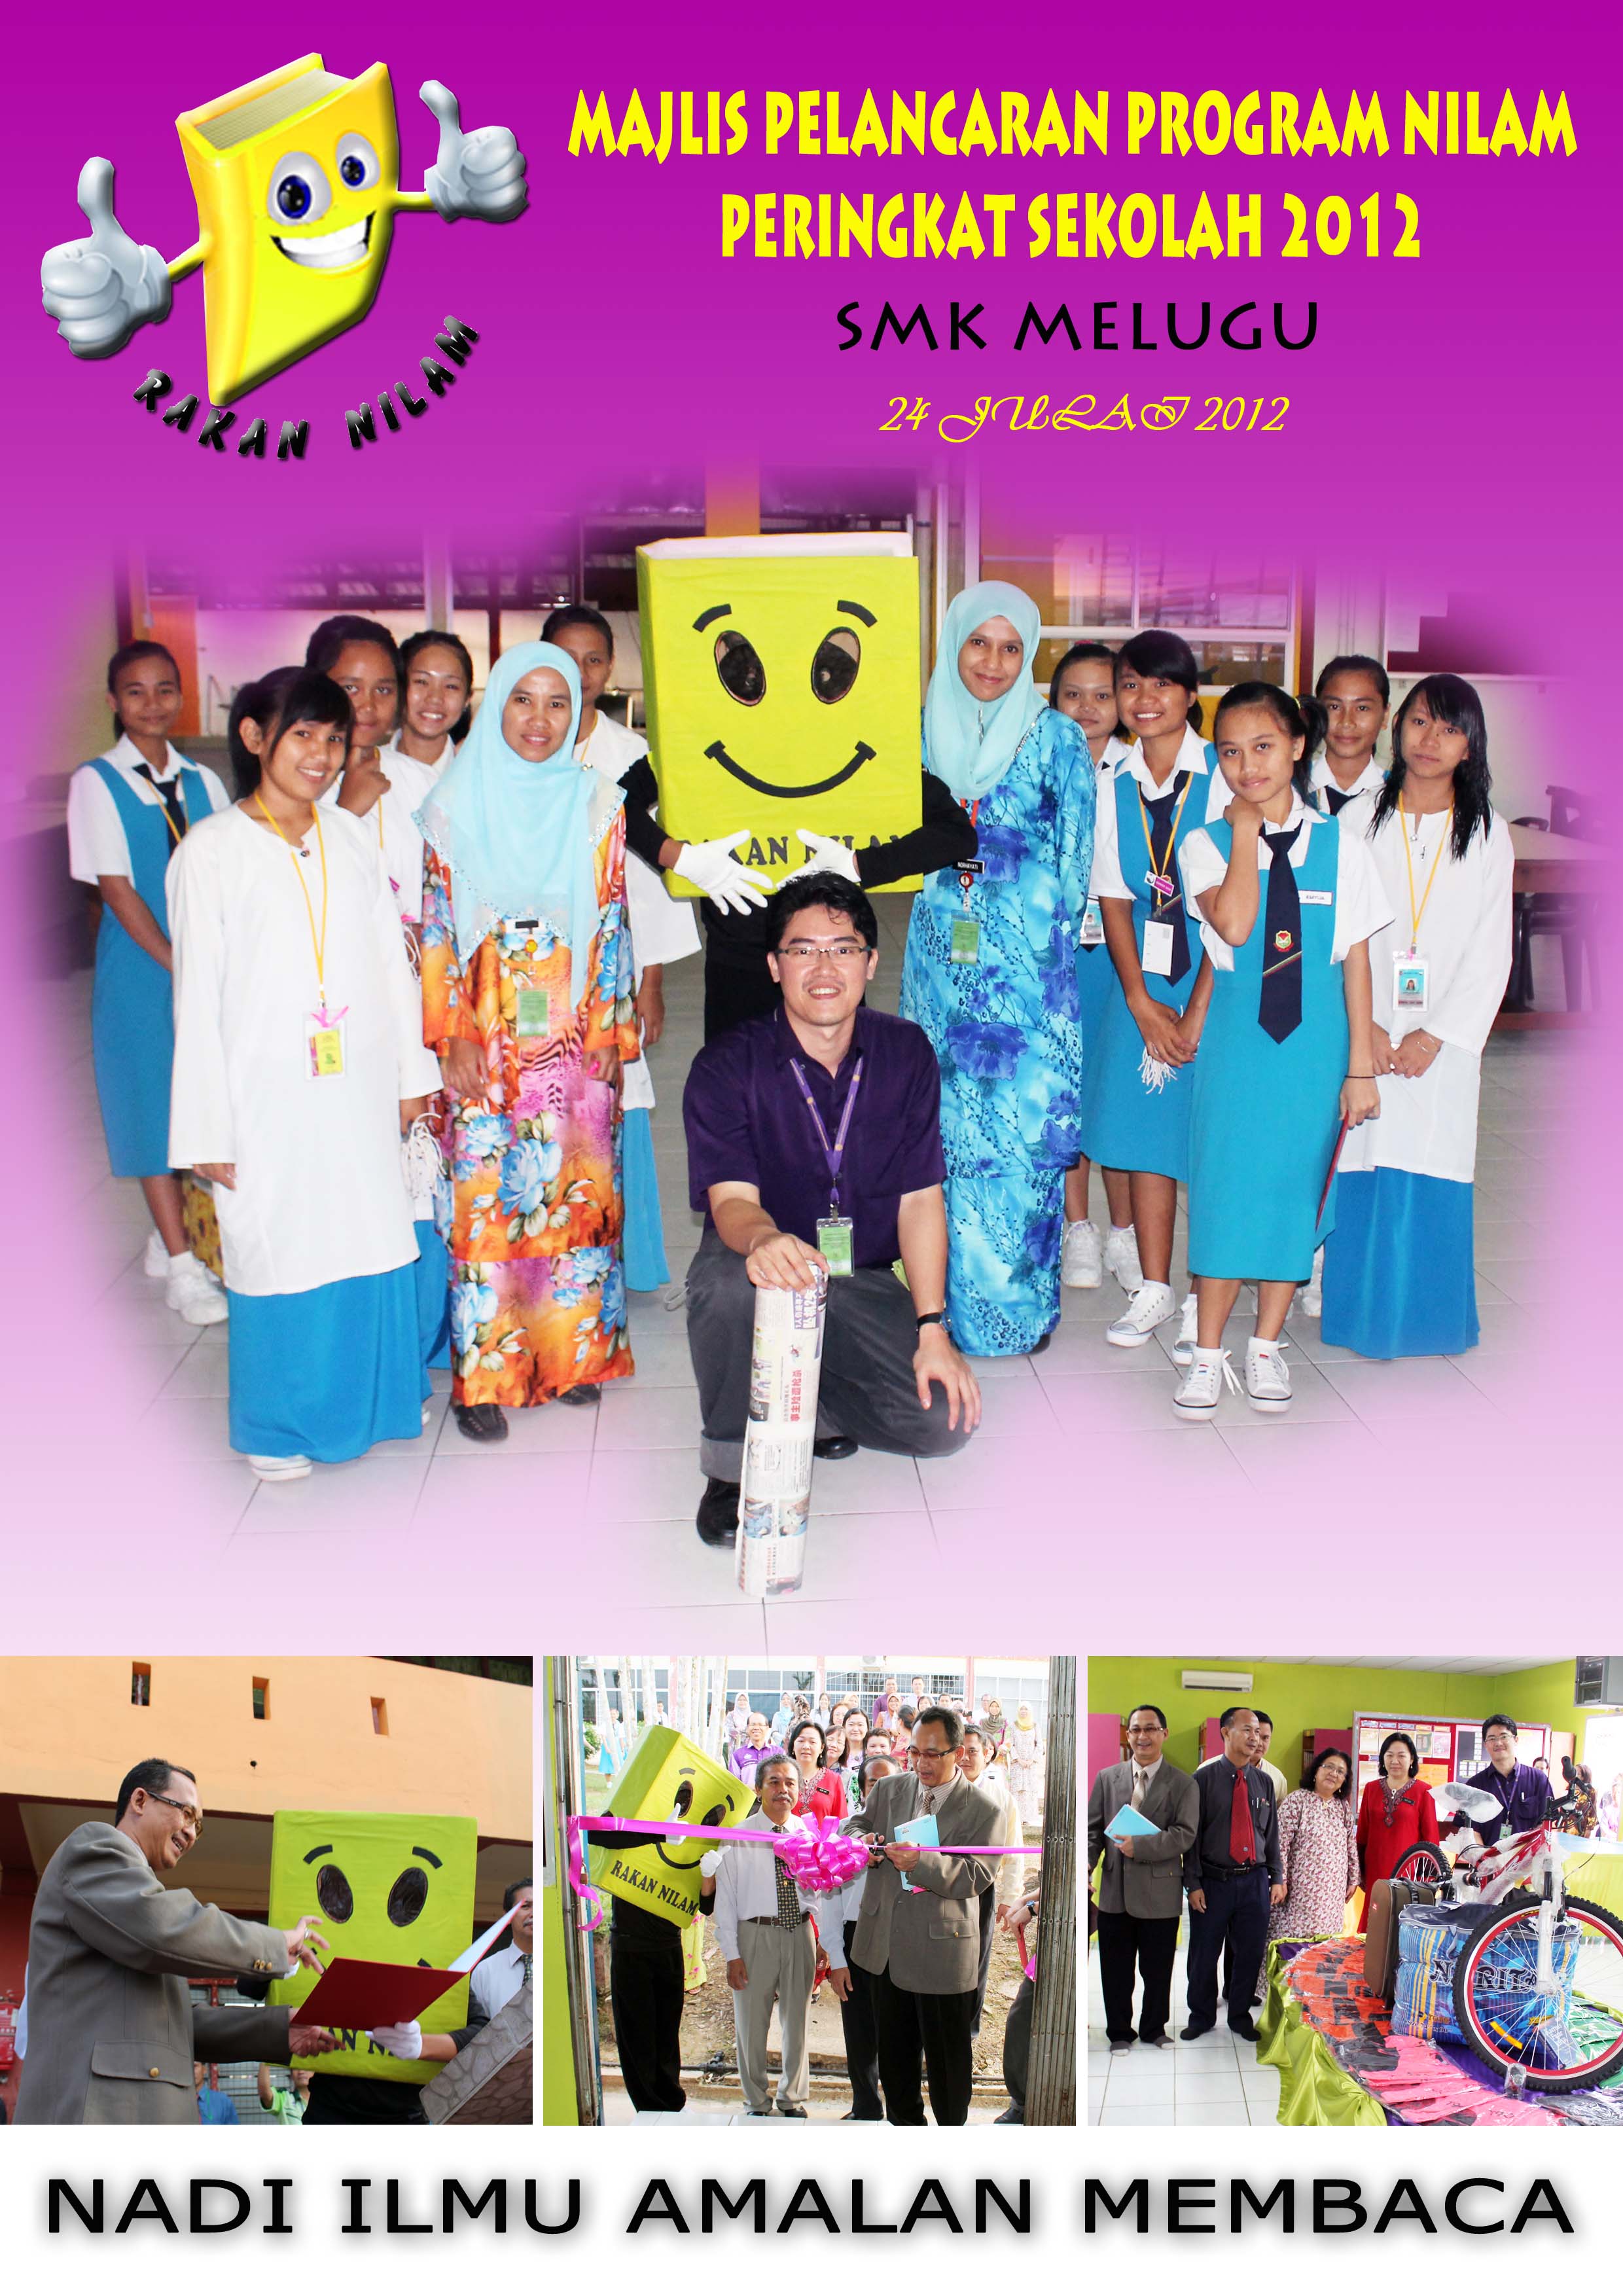 PUSAT SUMBER SMK MELUGU  Welcome to the best Pusat Sumber 